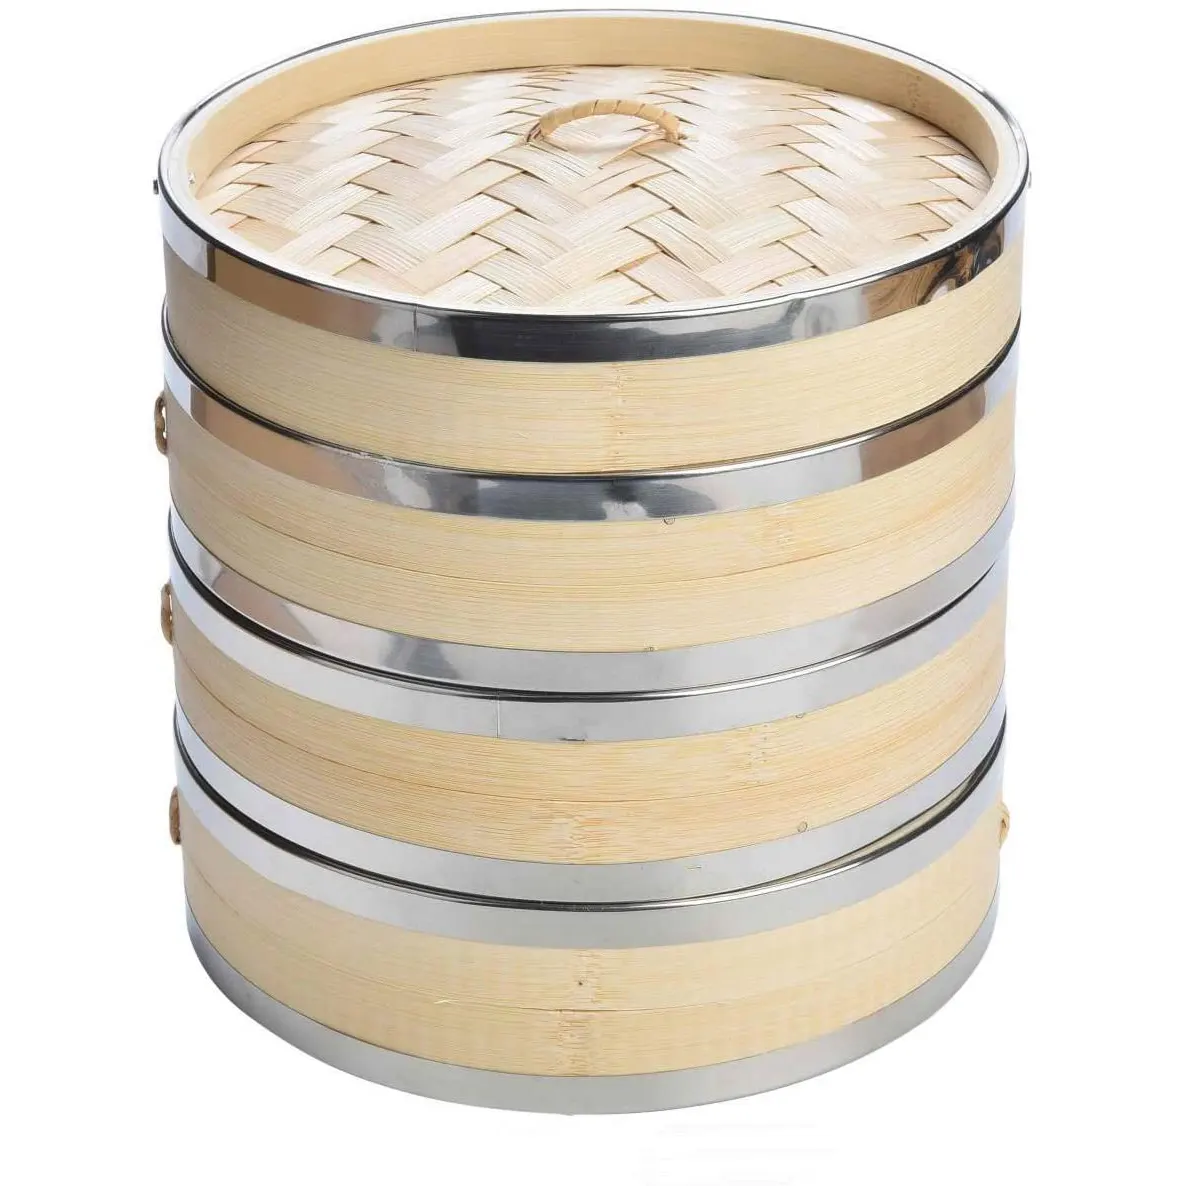 Custom Natural Bamboo Chinese Food Steamer Basket 10 inch, 2 Tier Baskets & Lid, Healthy Cooking for Vegetables